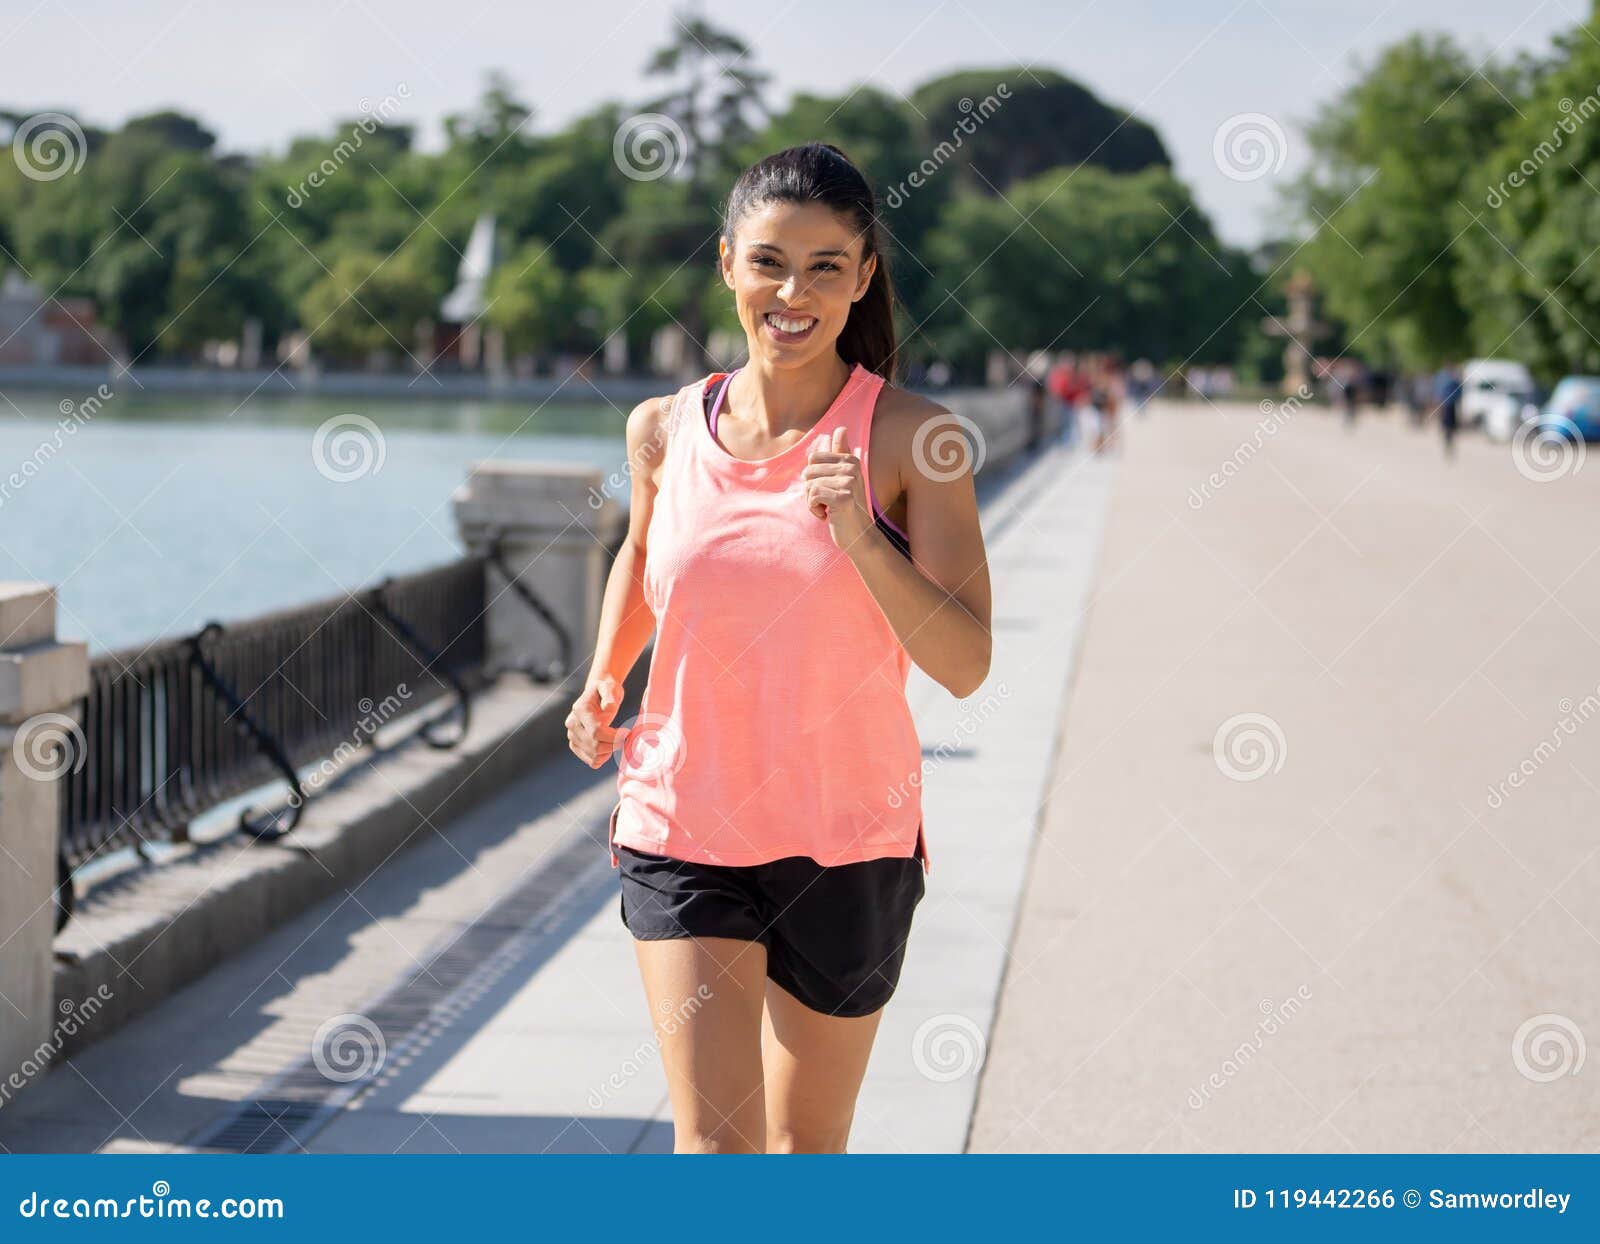 Young Attractive Happy Runner Working Out in a City Party in Fitness ...